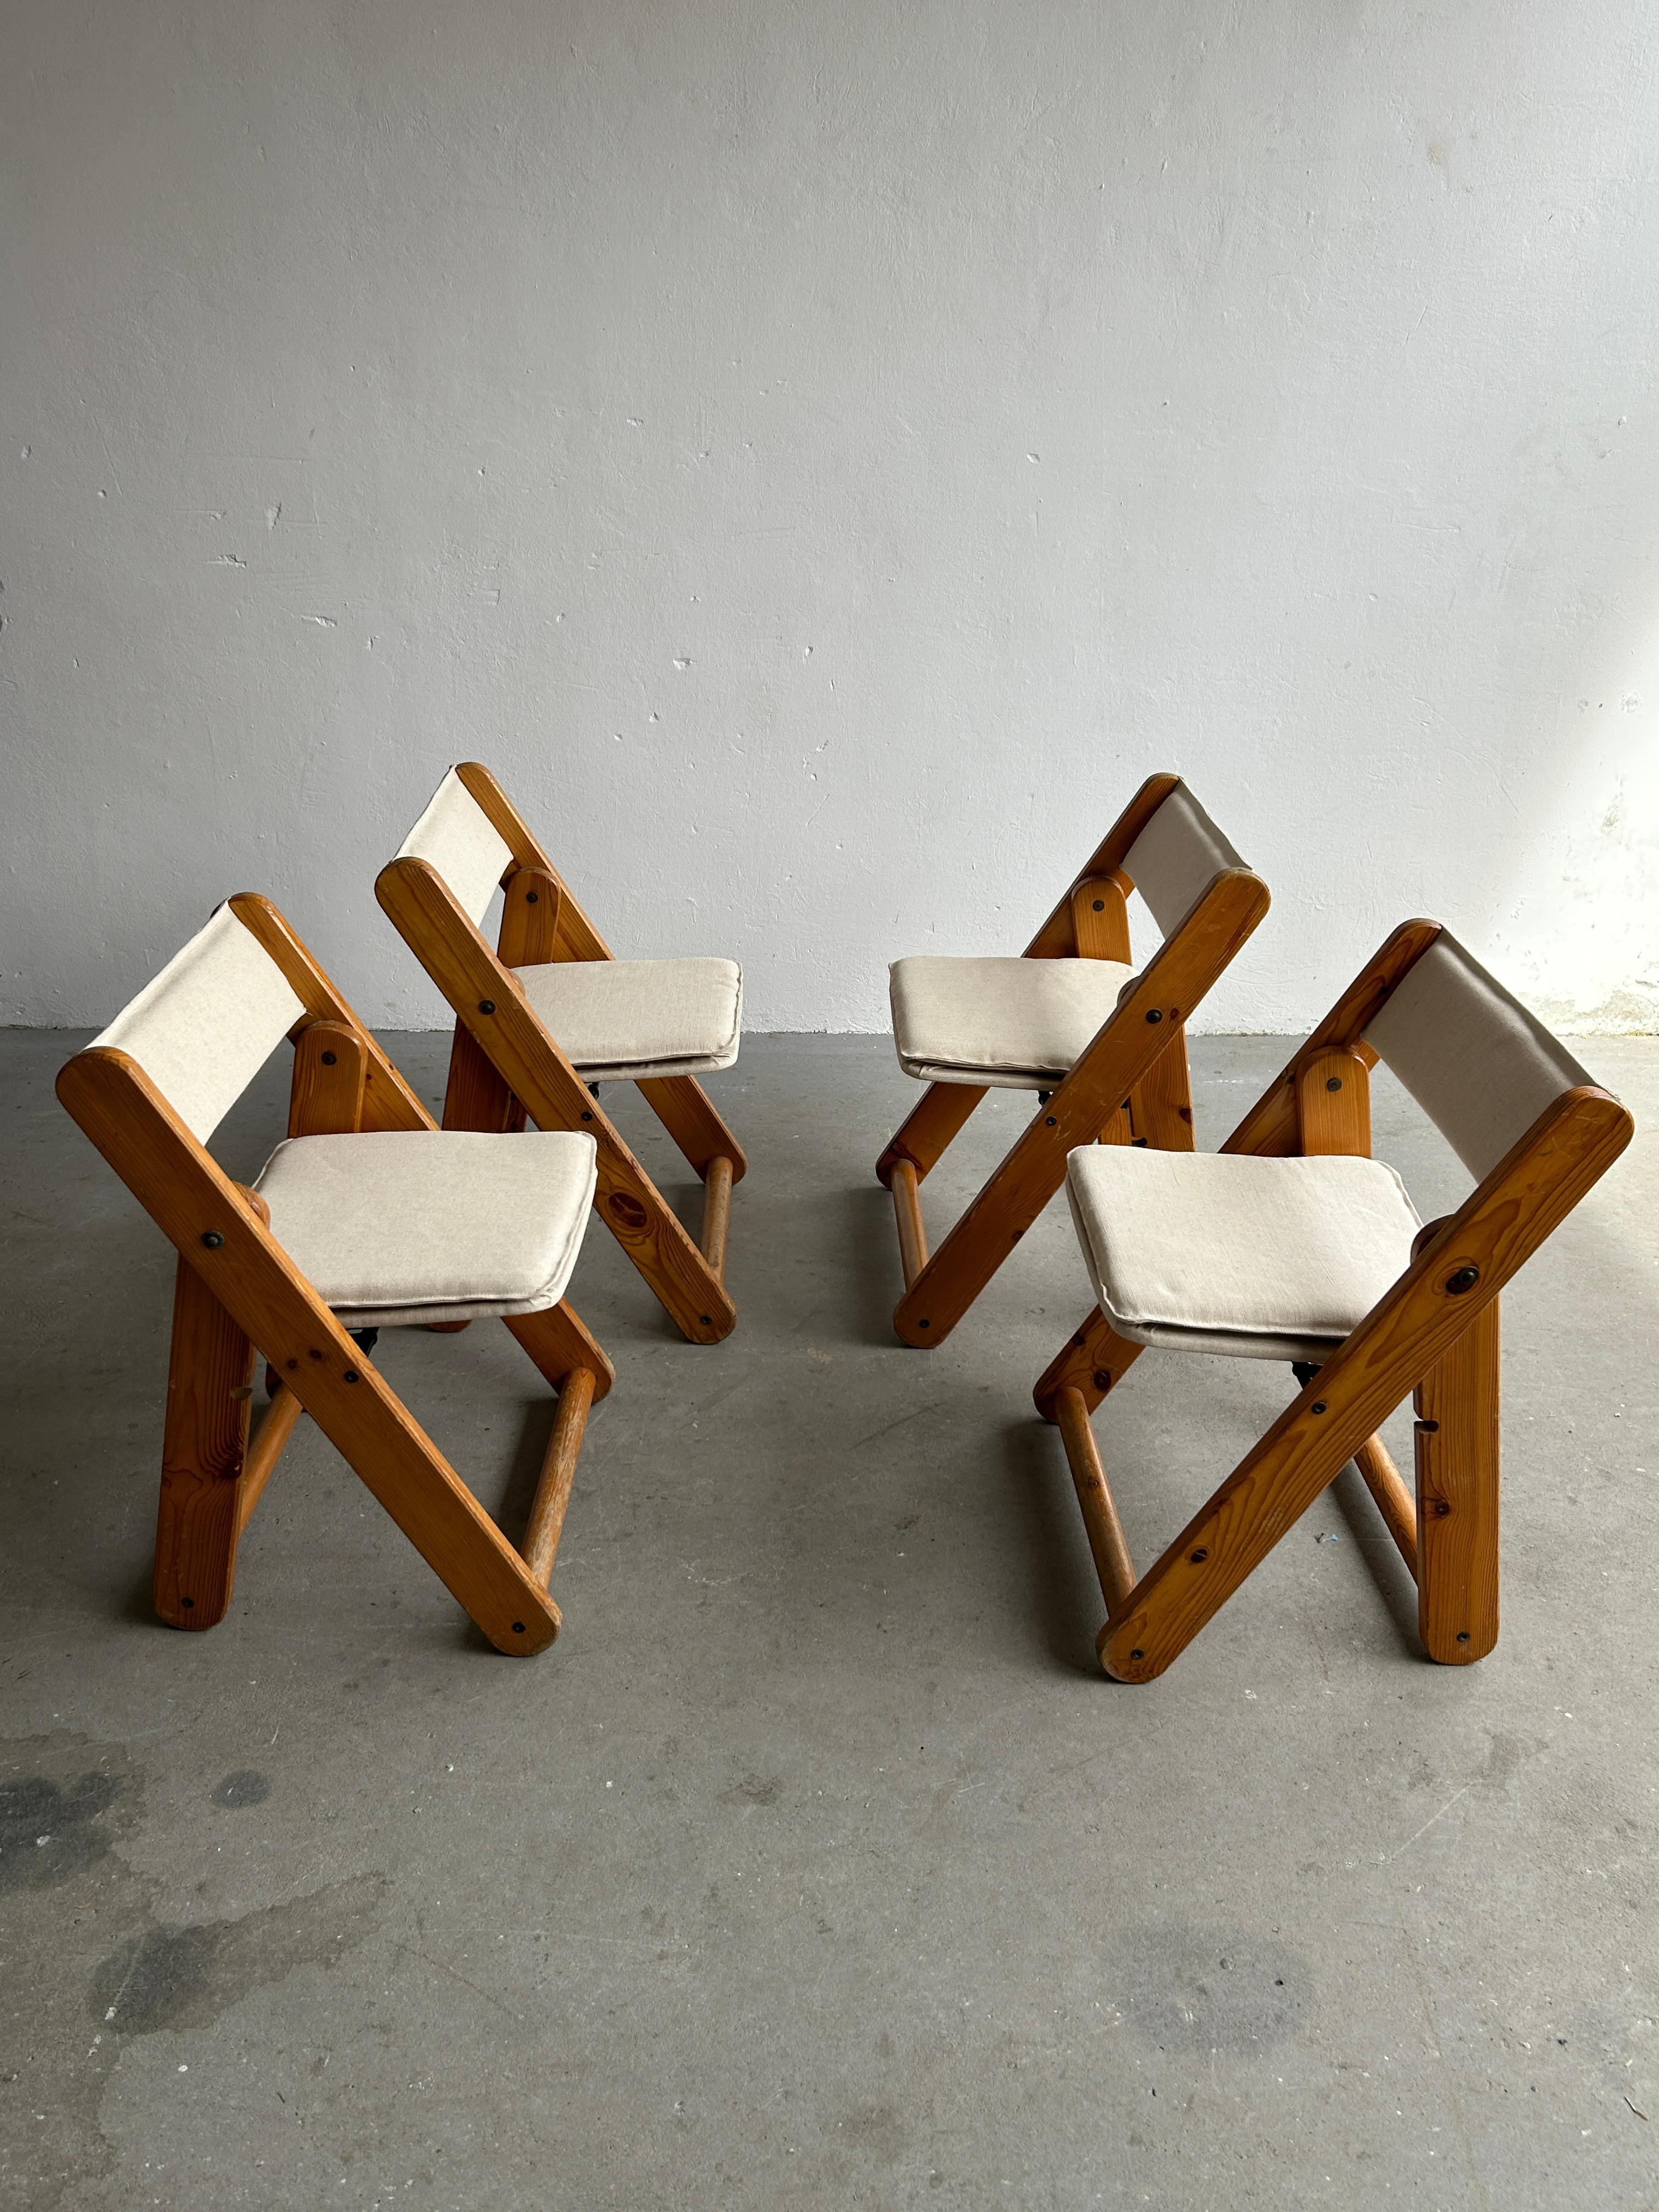 Set of four solid pine and canvas folding chairs designed by Gillis Lundgren for IKEA, 1970s.

Good vintage condition with expected signs of age. Authentically aged wood. Surface scratches and scuffs are present, as indicated in the photos.